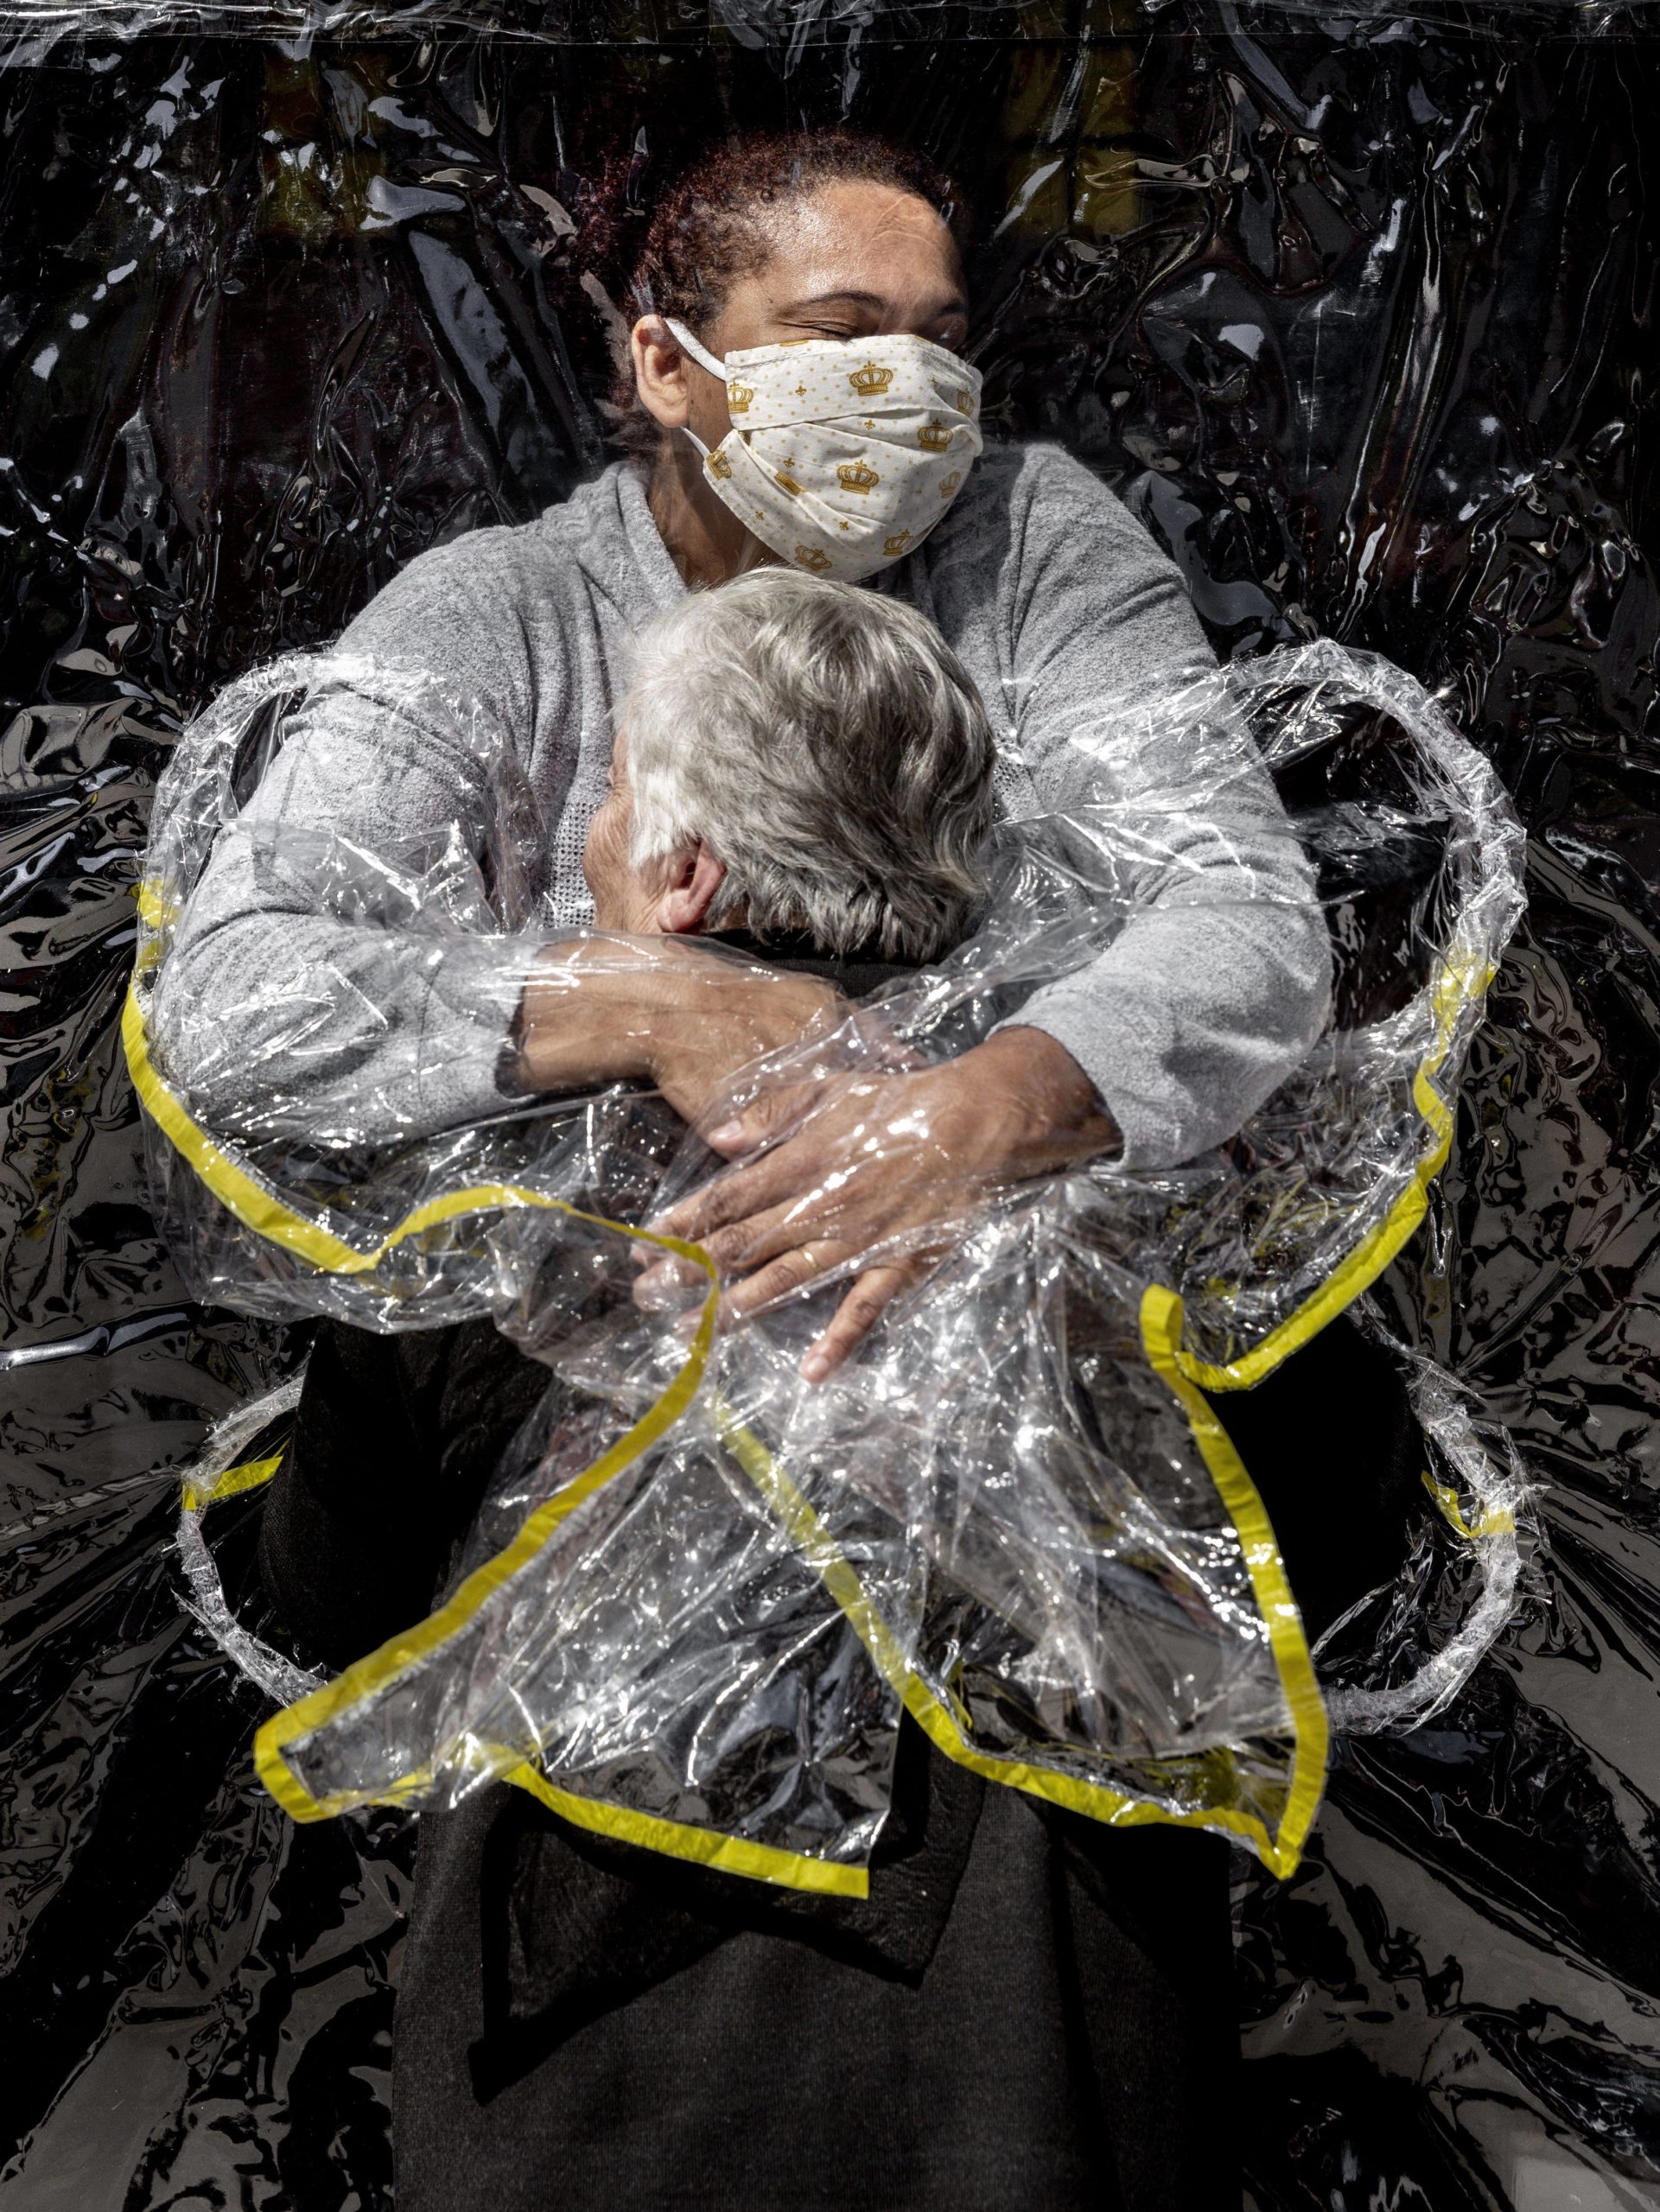 Chatting the Pictures: World Press Photo of The Year, A COVID-19 Hug